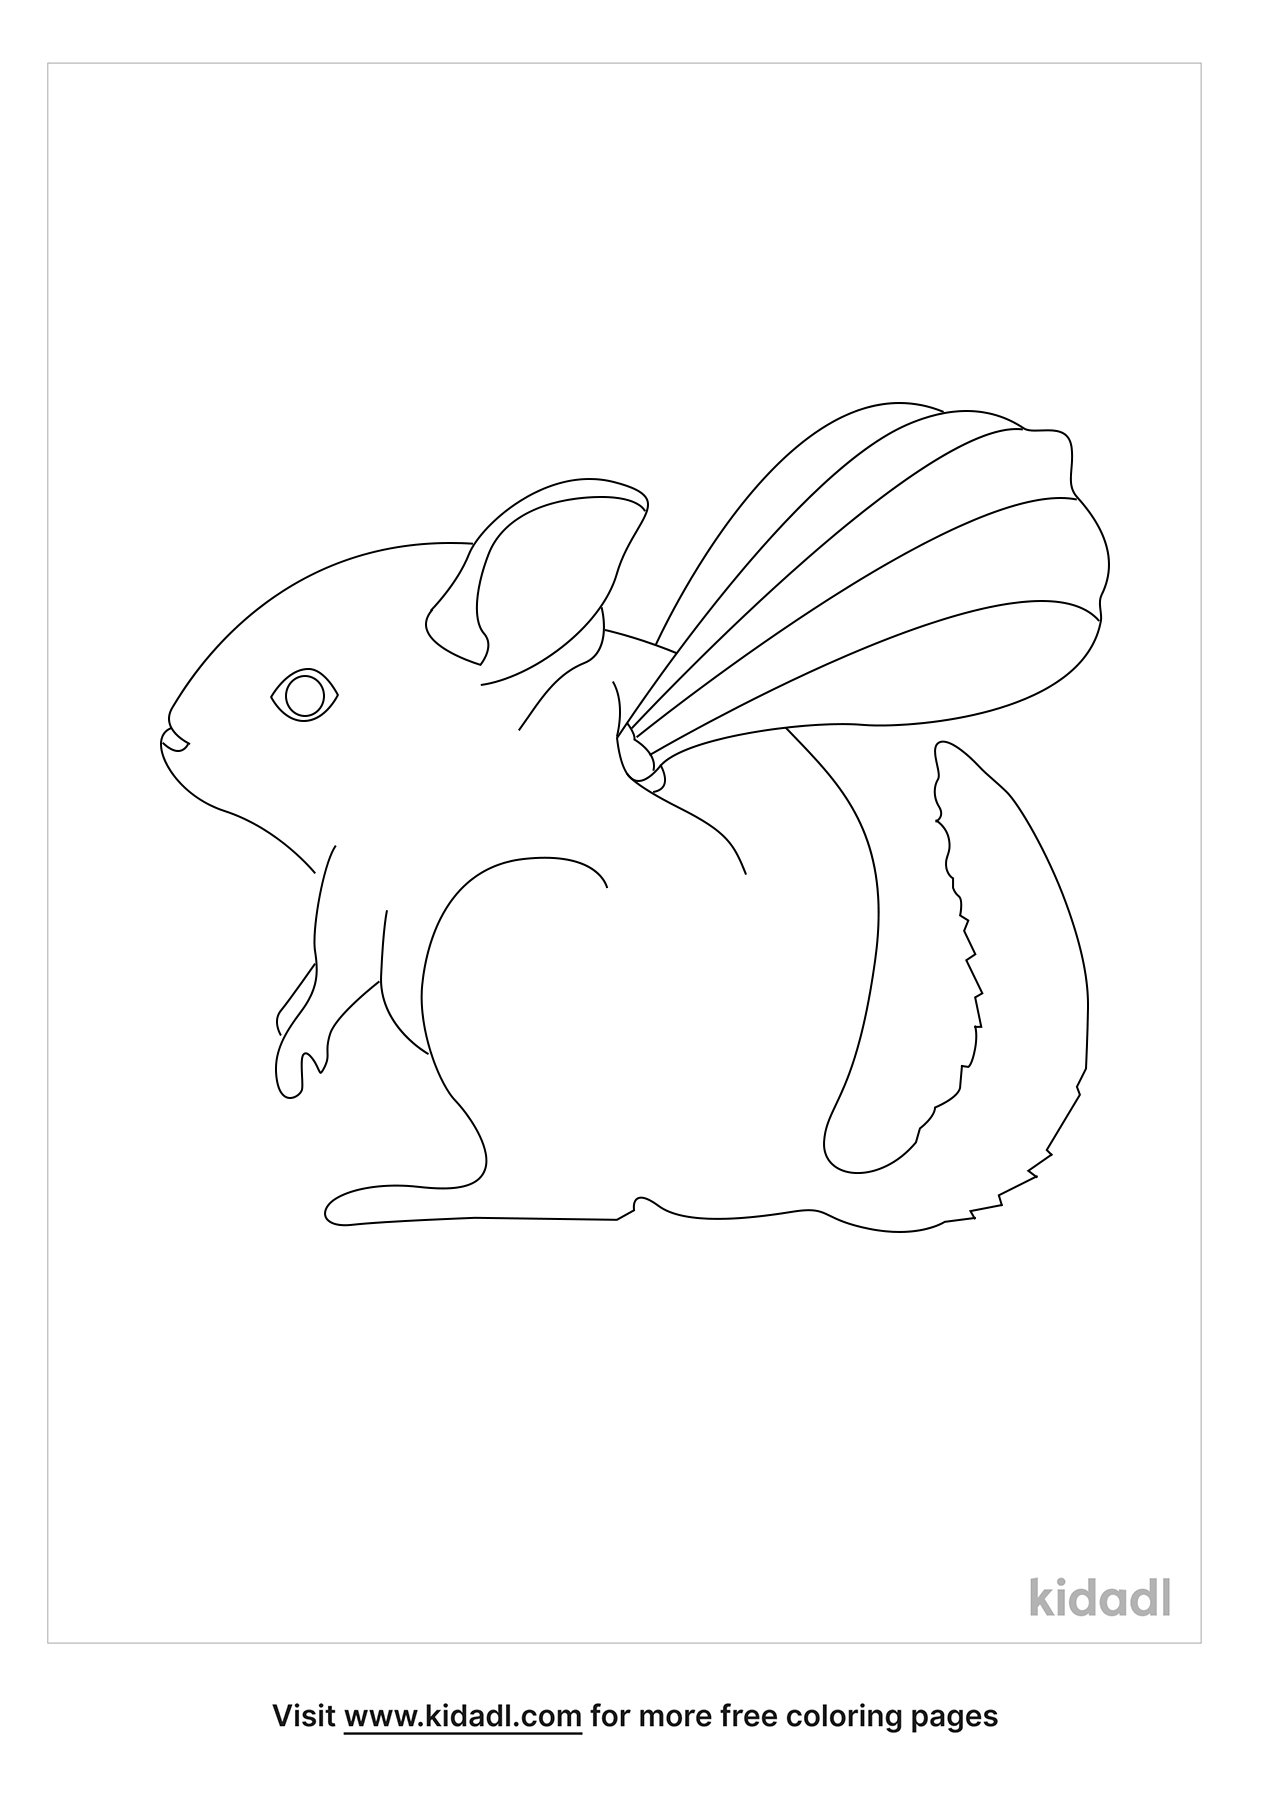 Winged Chinchilla Coloring Pages | Free Fairytales & Stories Coloring Pages  | Kidadl